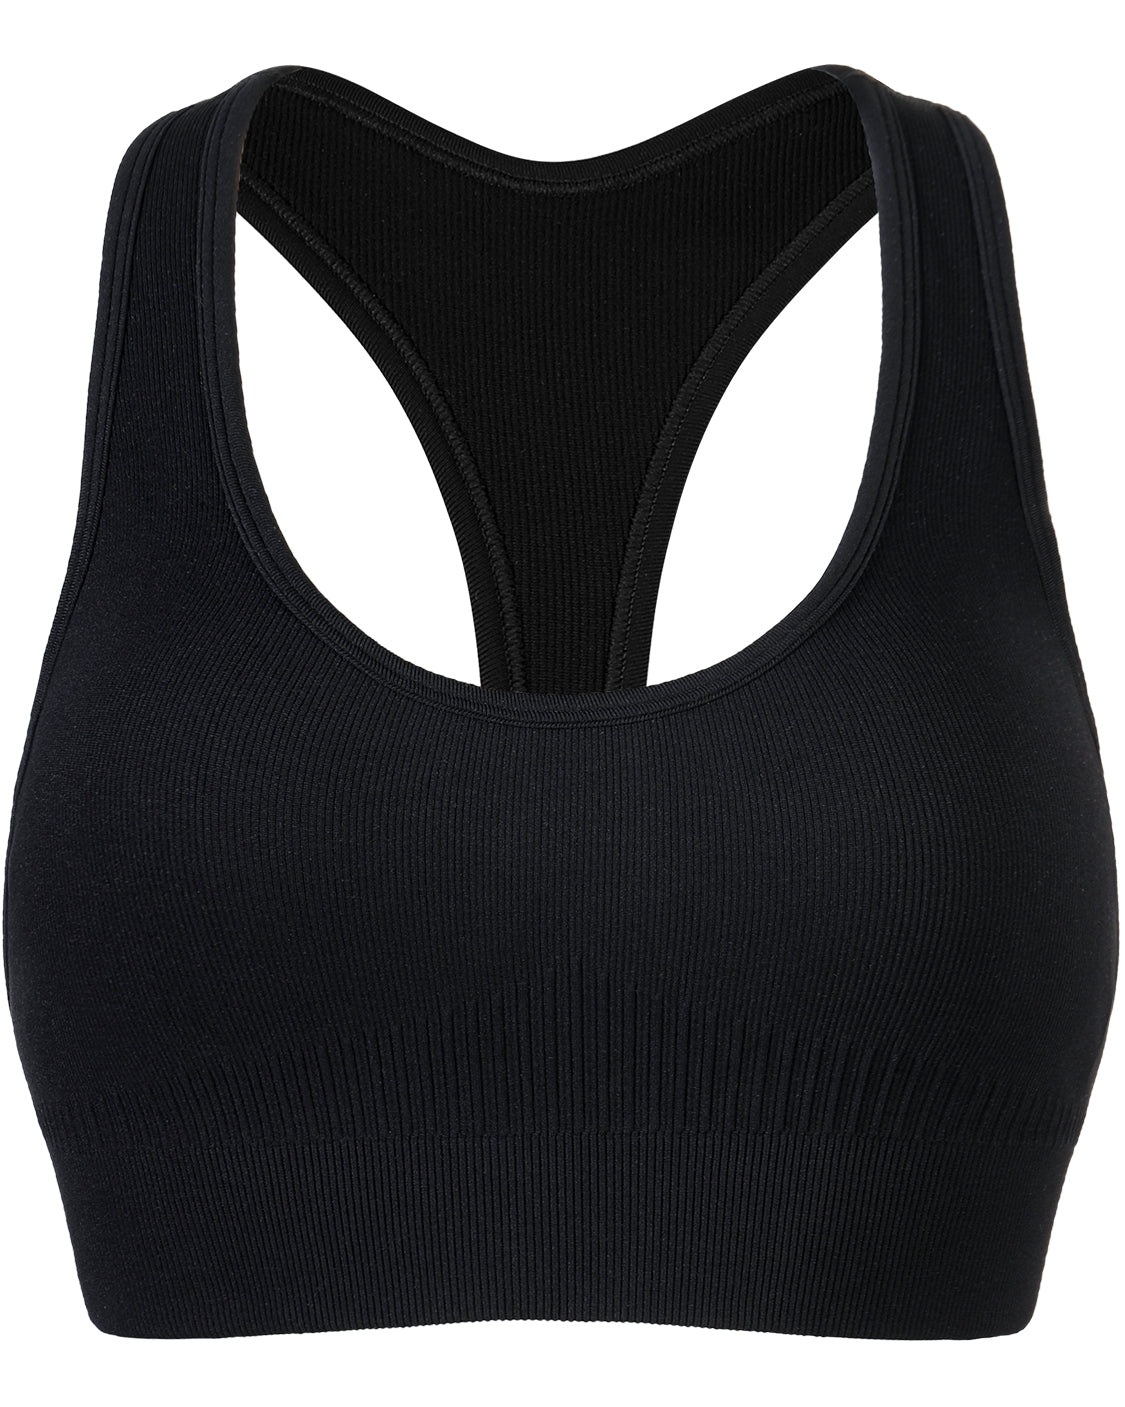 Natural Feelings Sports Bras for Women Removable Padded Yoga Tank Tops  Sleeveless Fitness Workout Running Crop Tops Coffee Brown